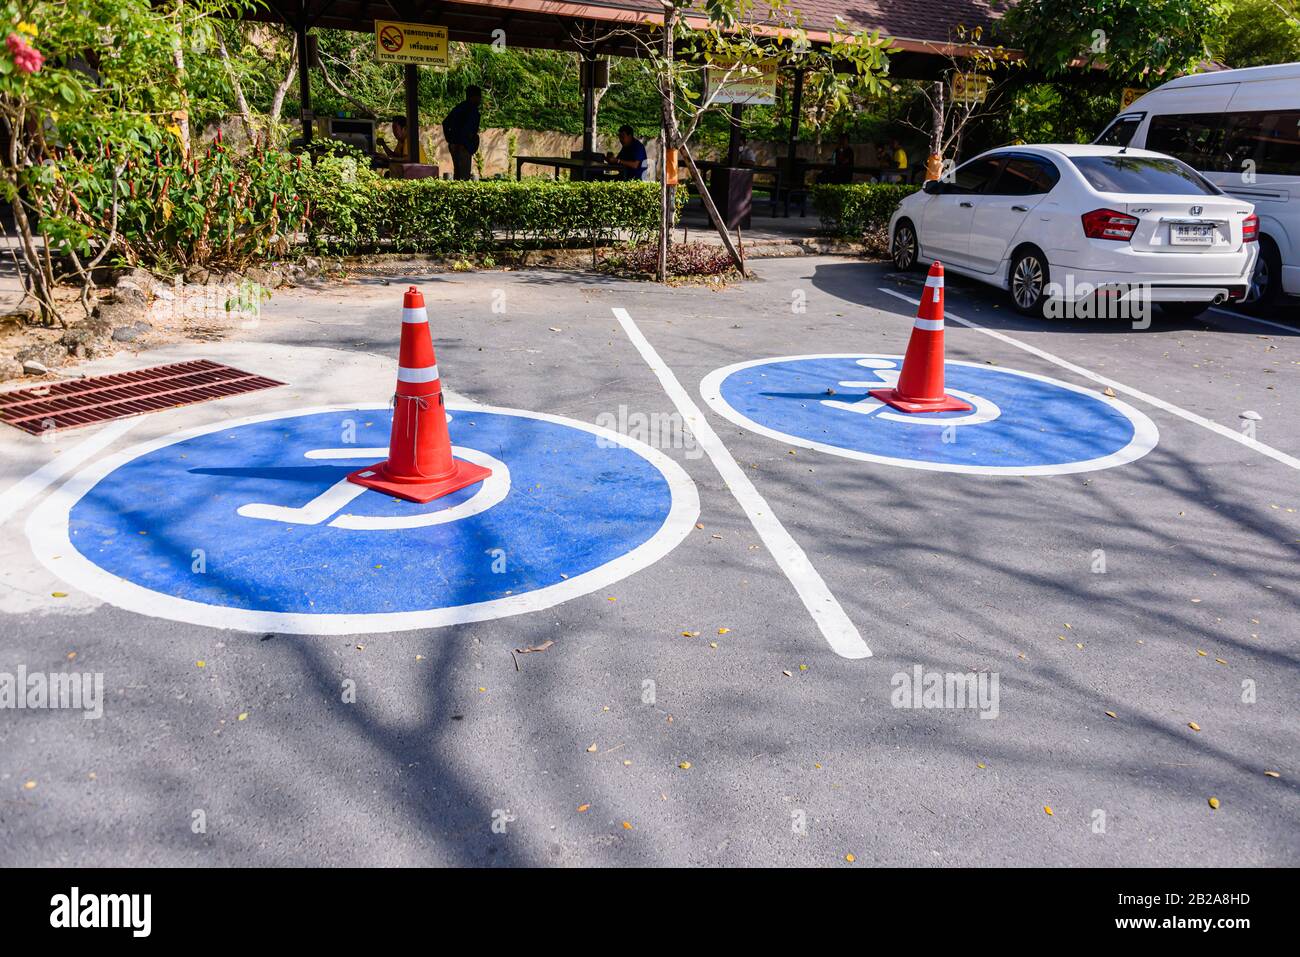 Traffic Cones on freshly painted road markings for disabled parking spaces. Stock Photo